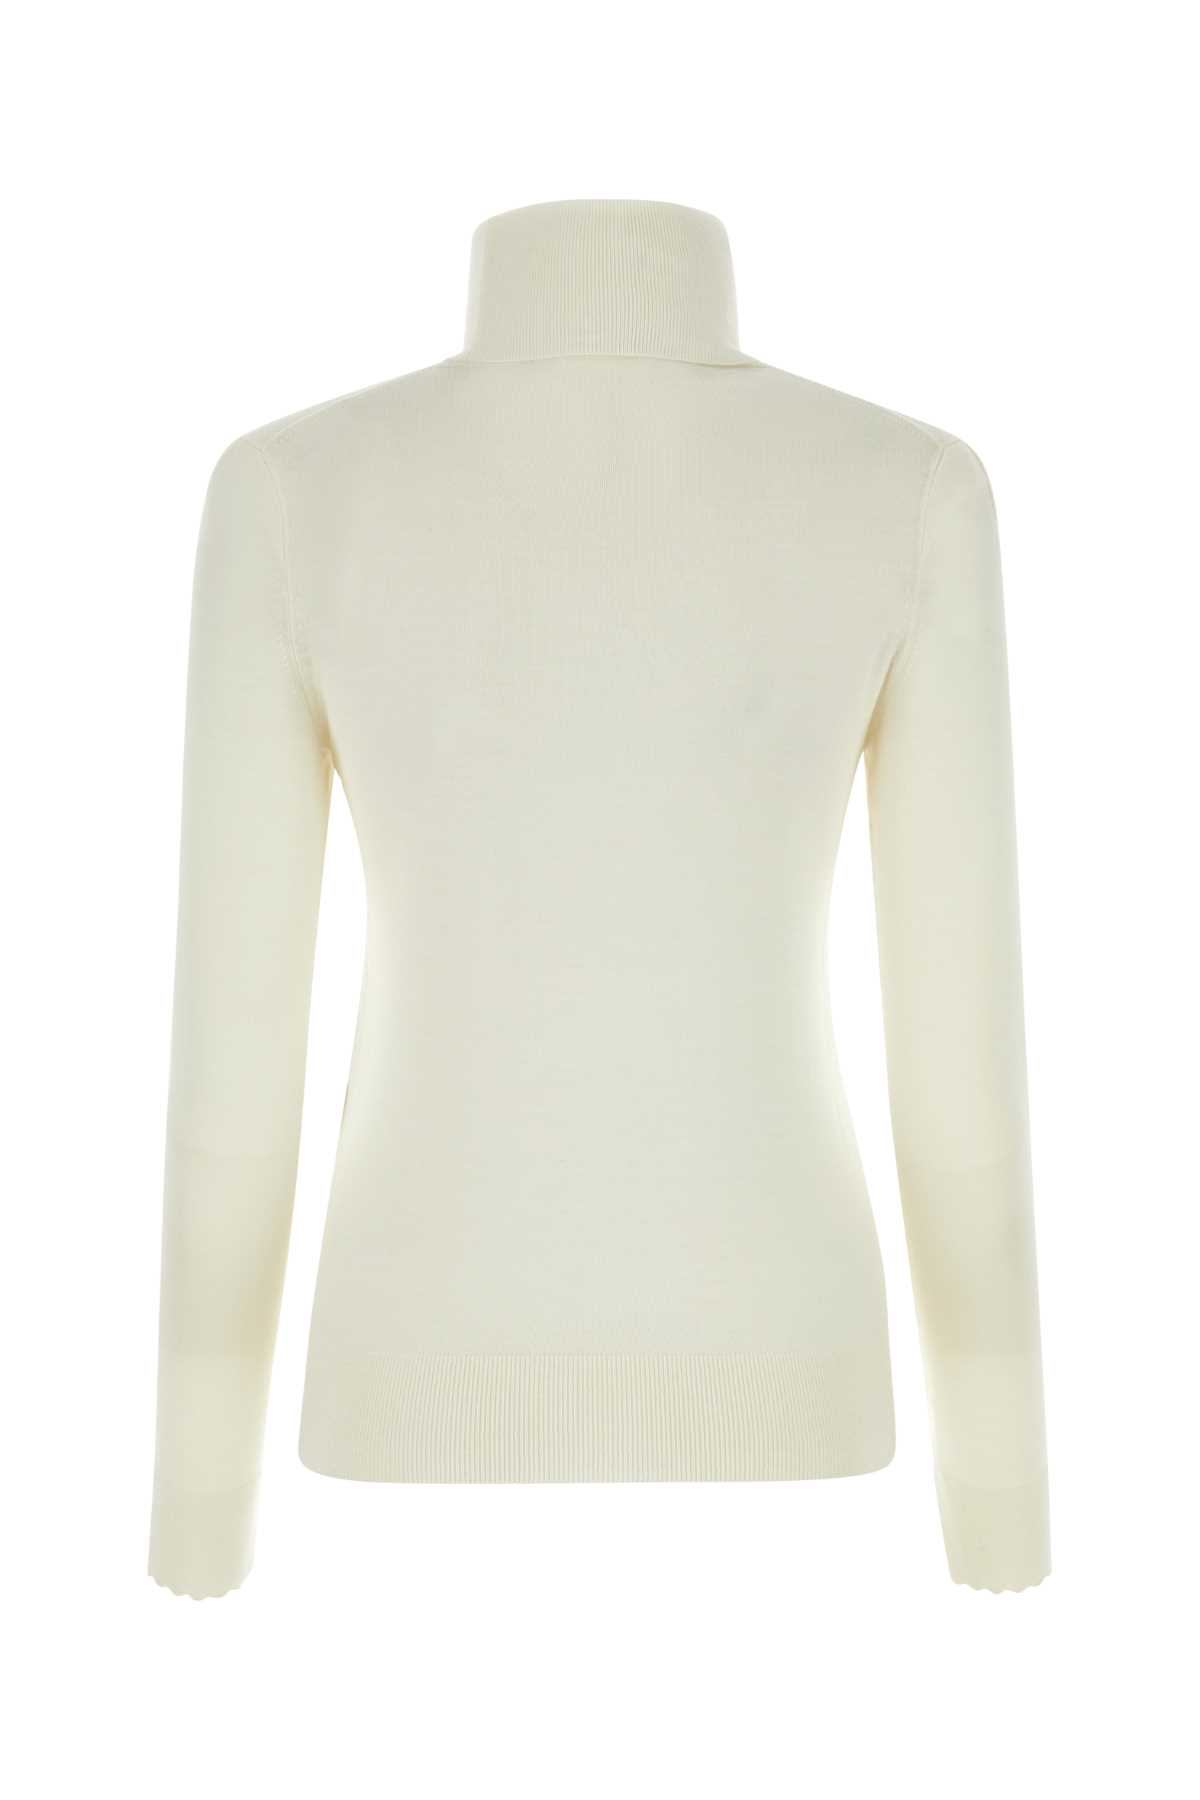 Chloé Ivory Wool Sweater In Iconicmilk